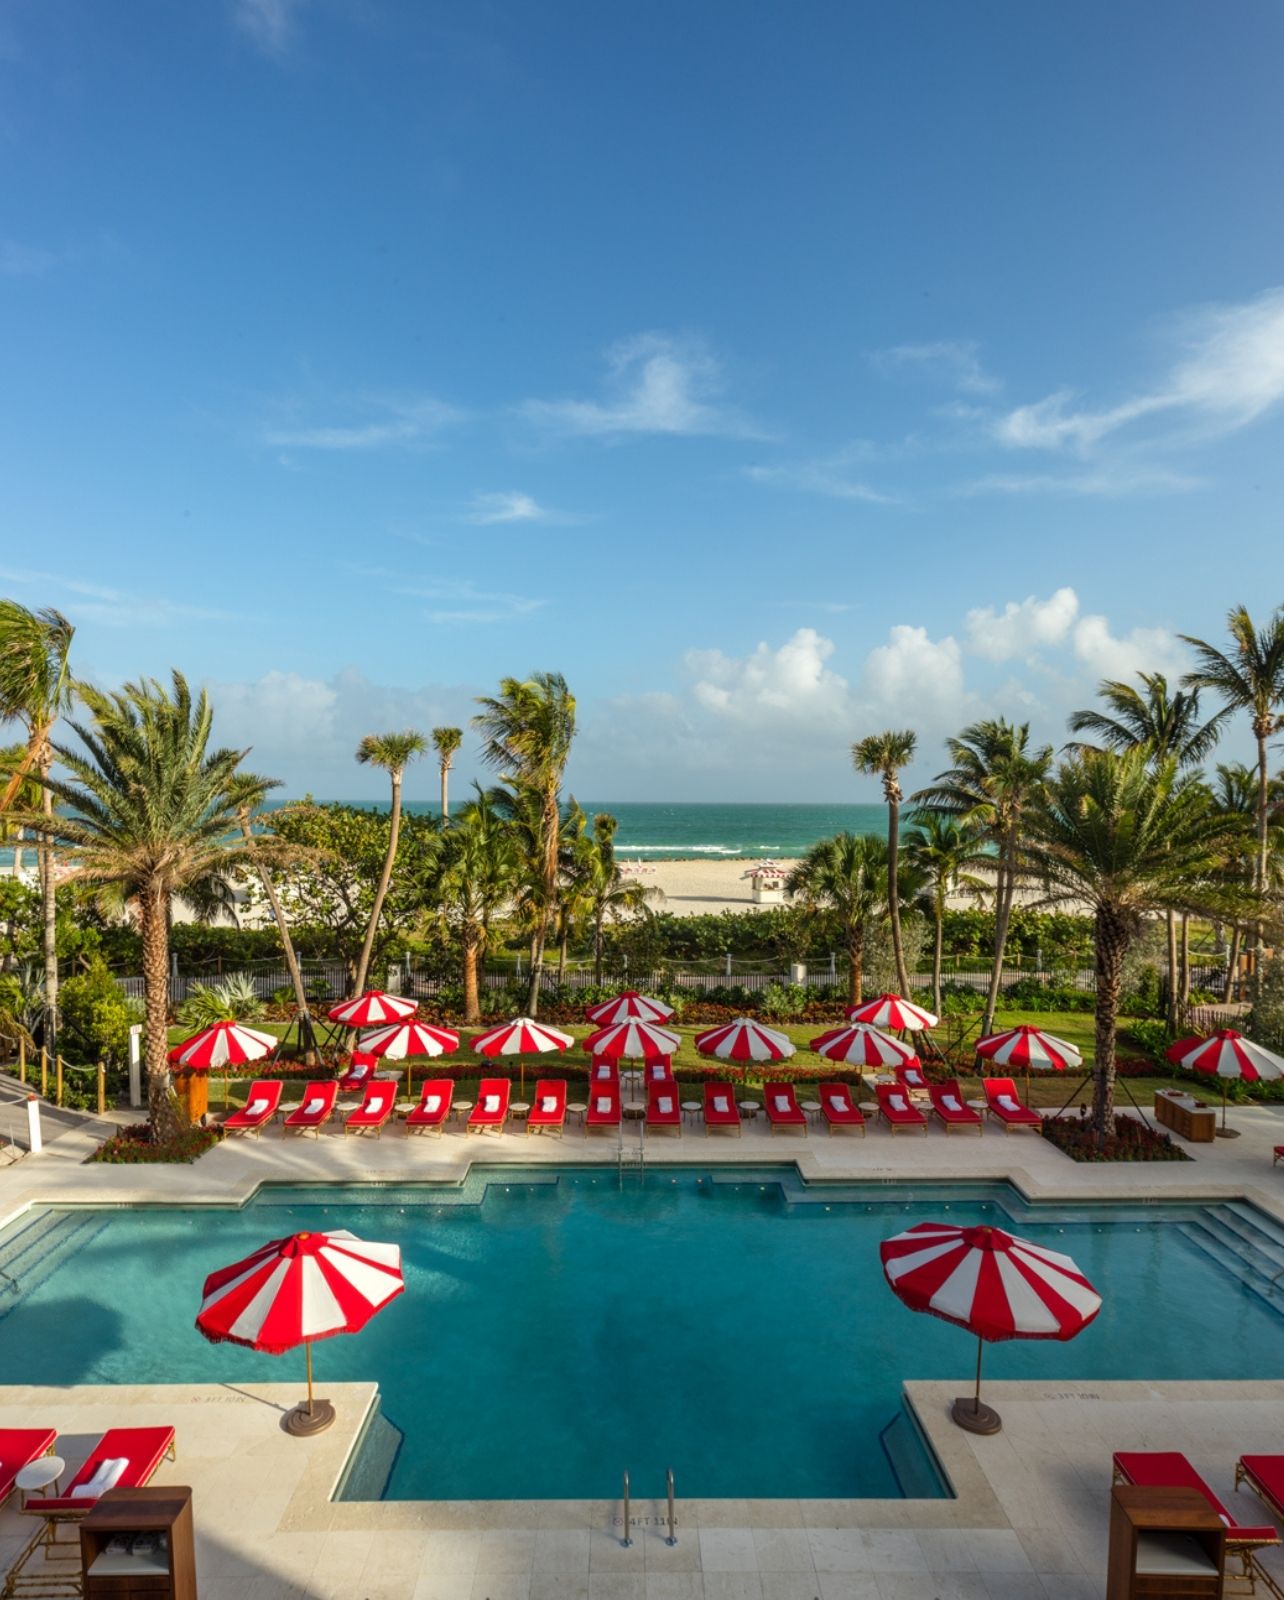 The Faena Hotel pool, decorated with red and white beach umbrellas